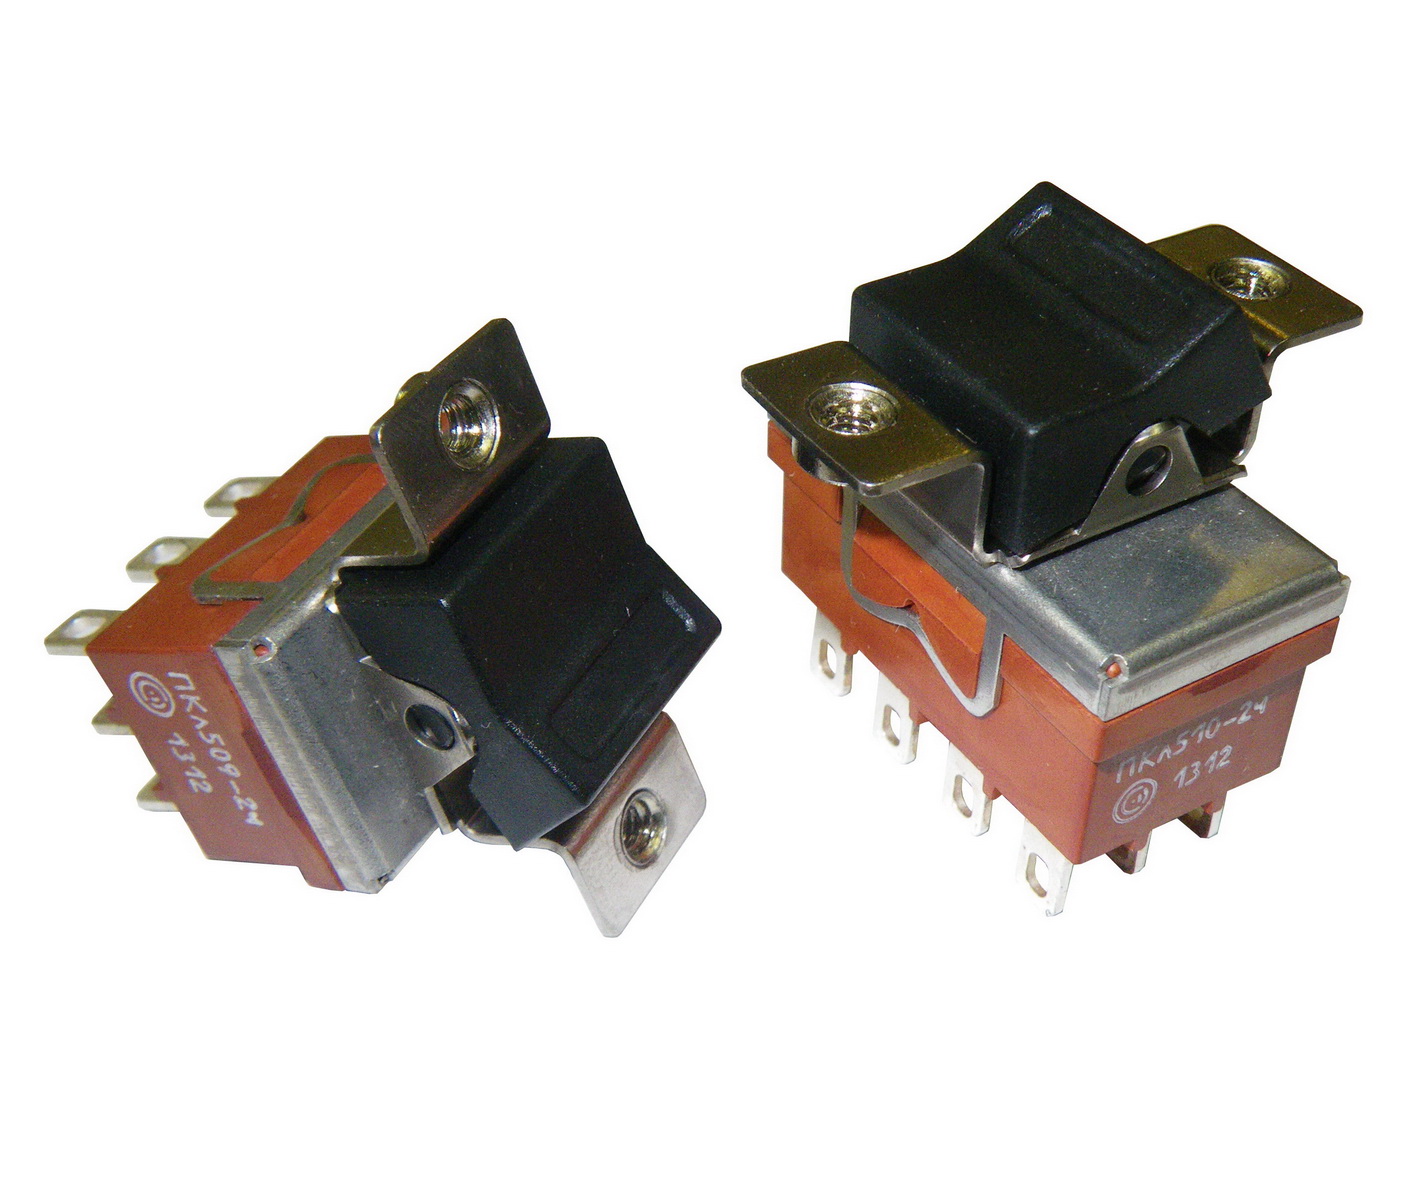 Toggle switches PCL 509, PCL 510